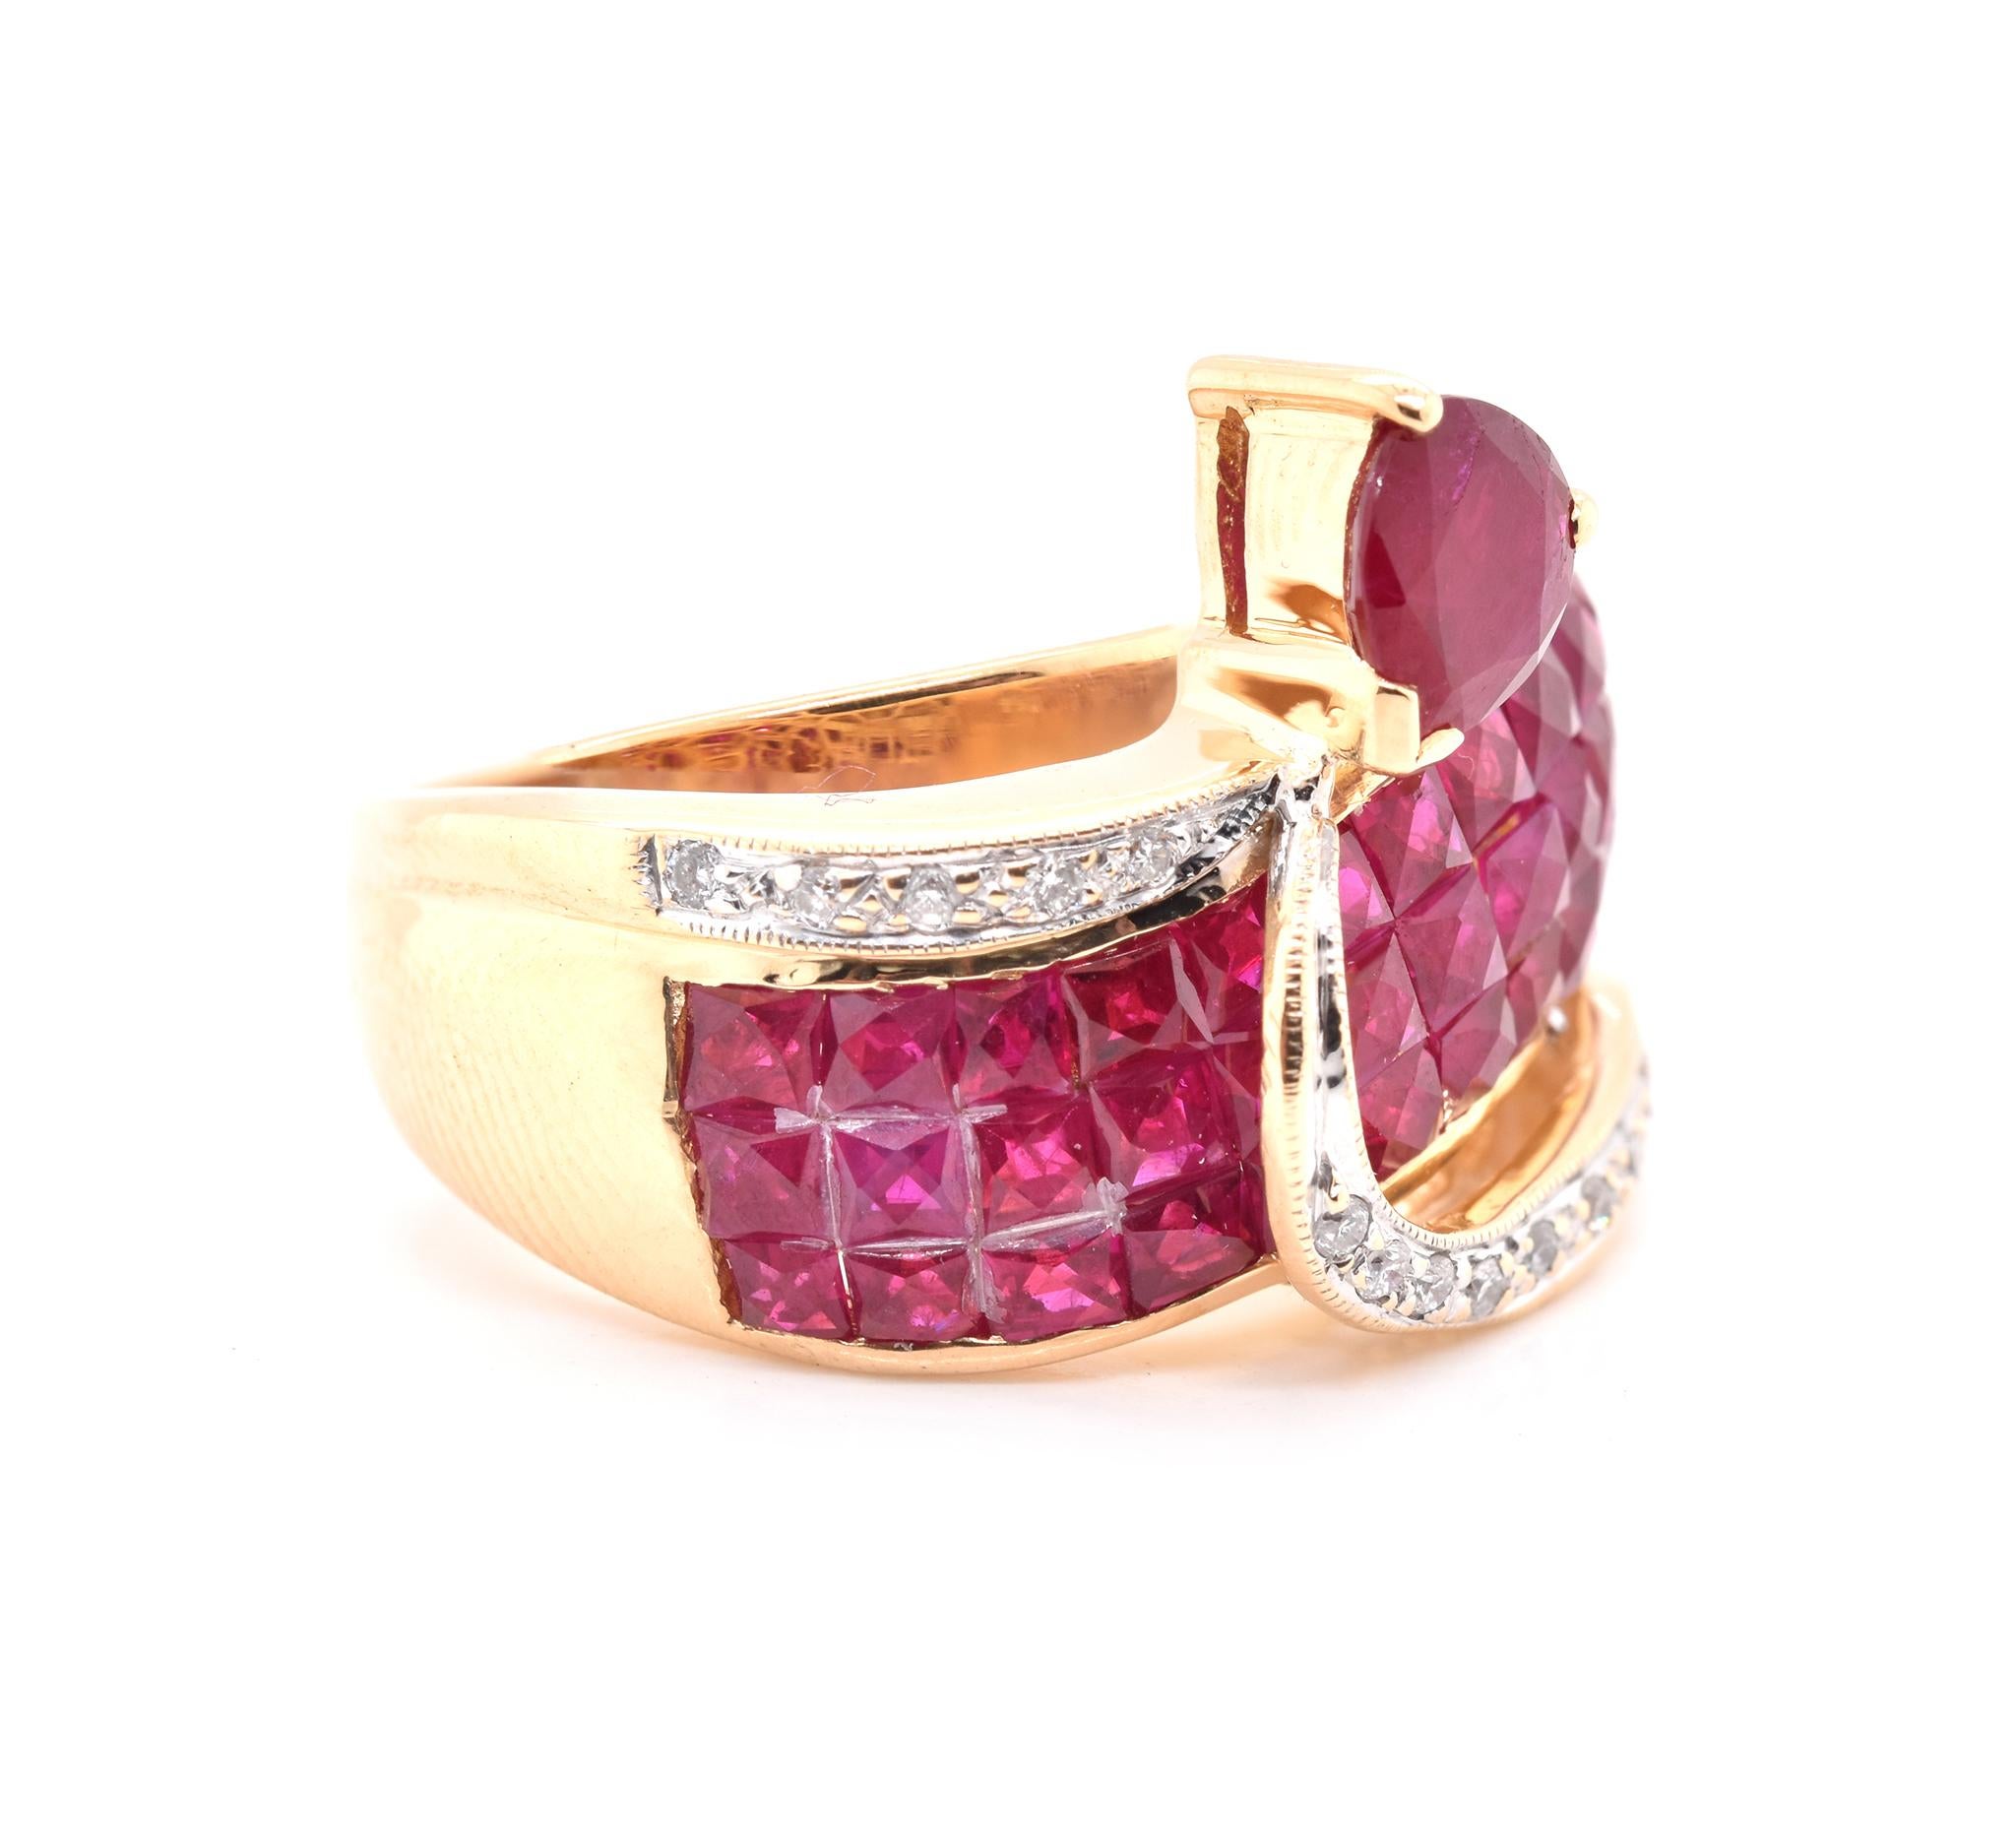 Designer: JCR
Material: 18K Yellow gold
Diamonds: 15 round cut = .15cttw
Color: G
Clarity: SI1
Ruby: 36 invisible set square faceted cut = 3.24cttw
Ruby: 1 pear cut = .52ct
Color: Pigeons Blood
Clarity: AAA
Dimensions: ring top measures 16.71mm